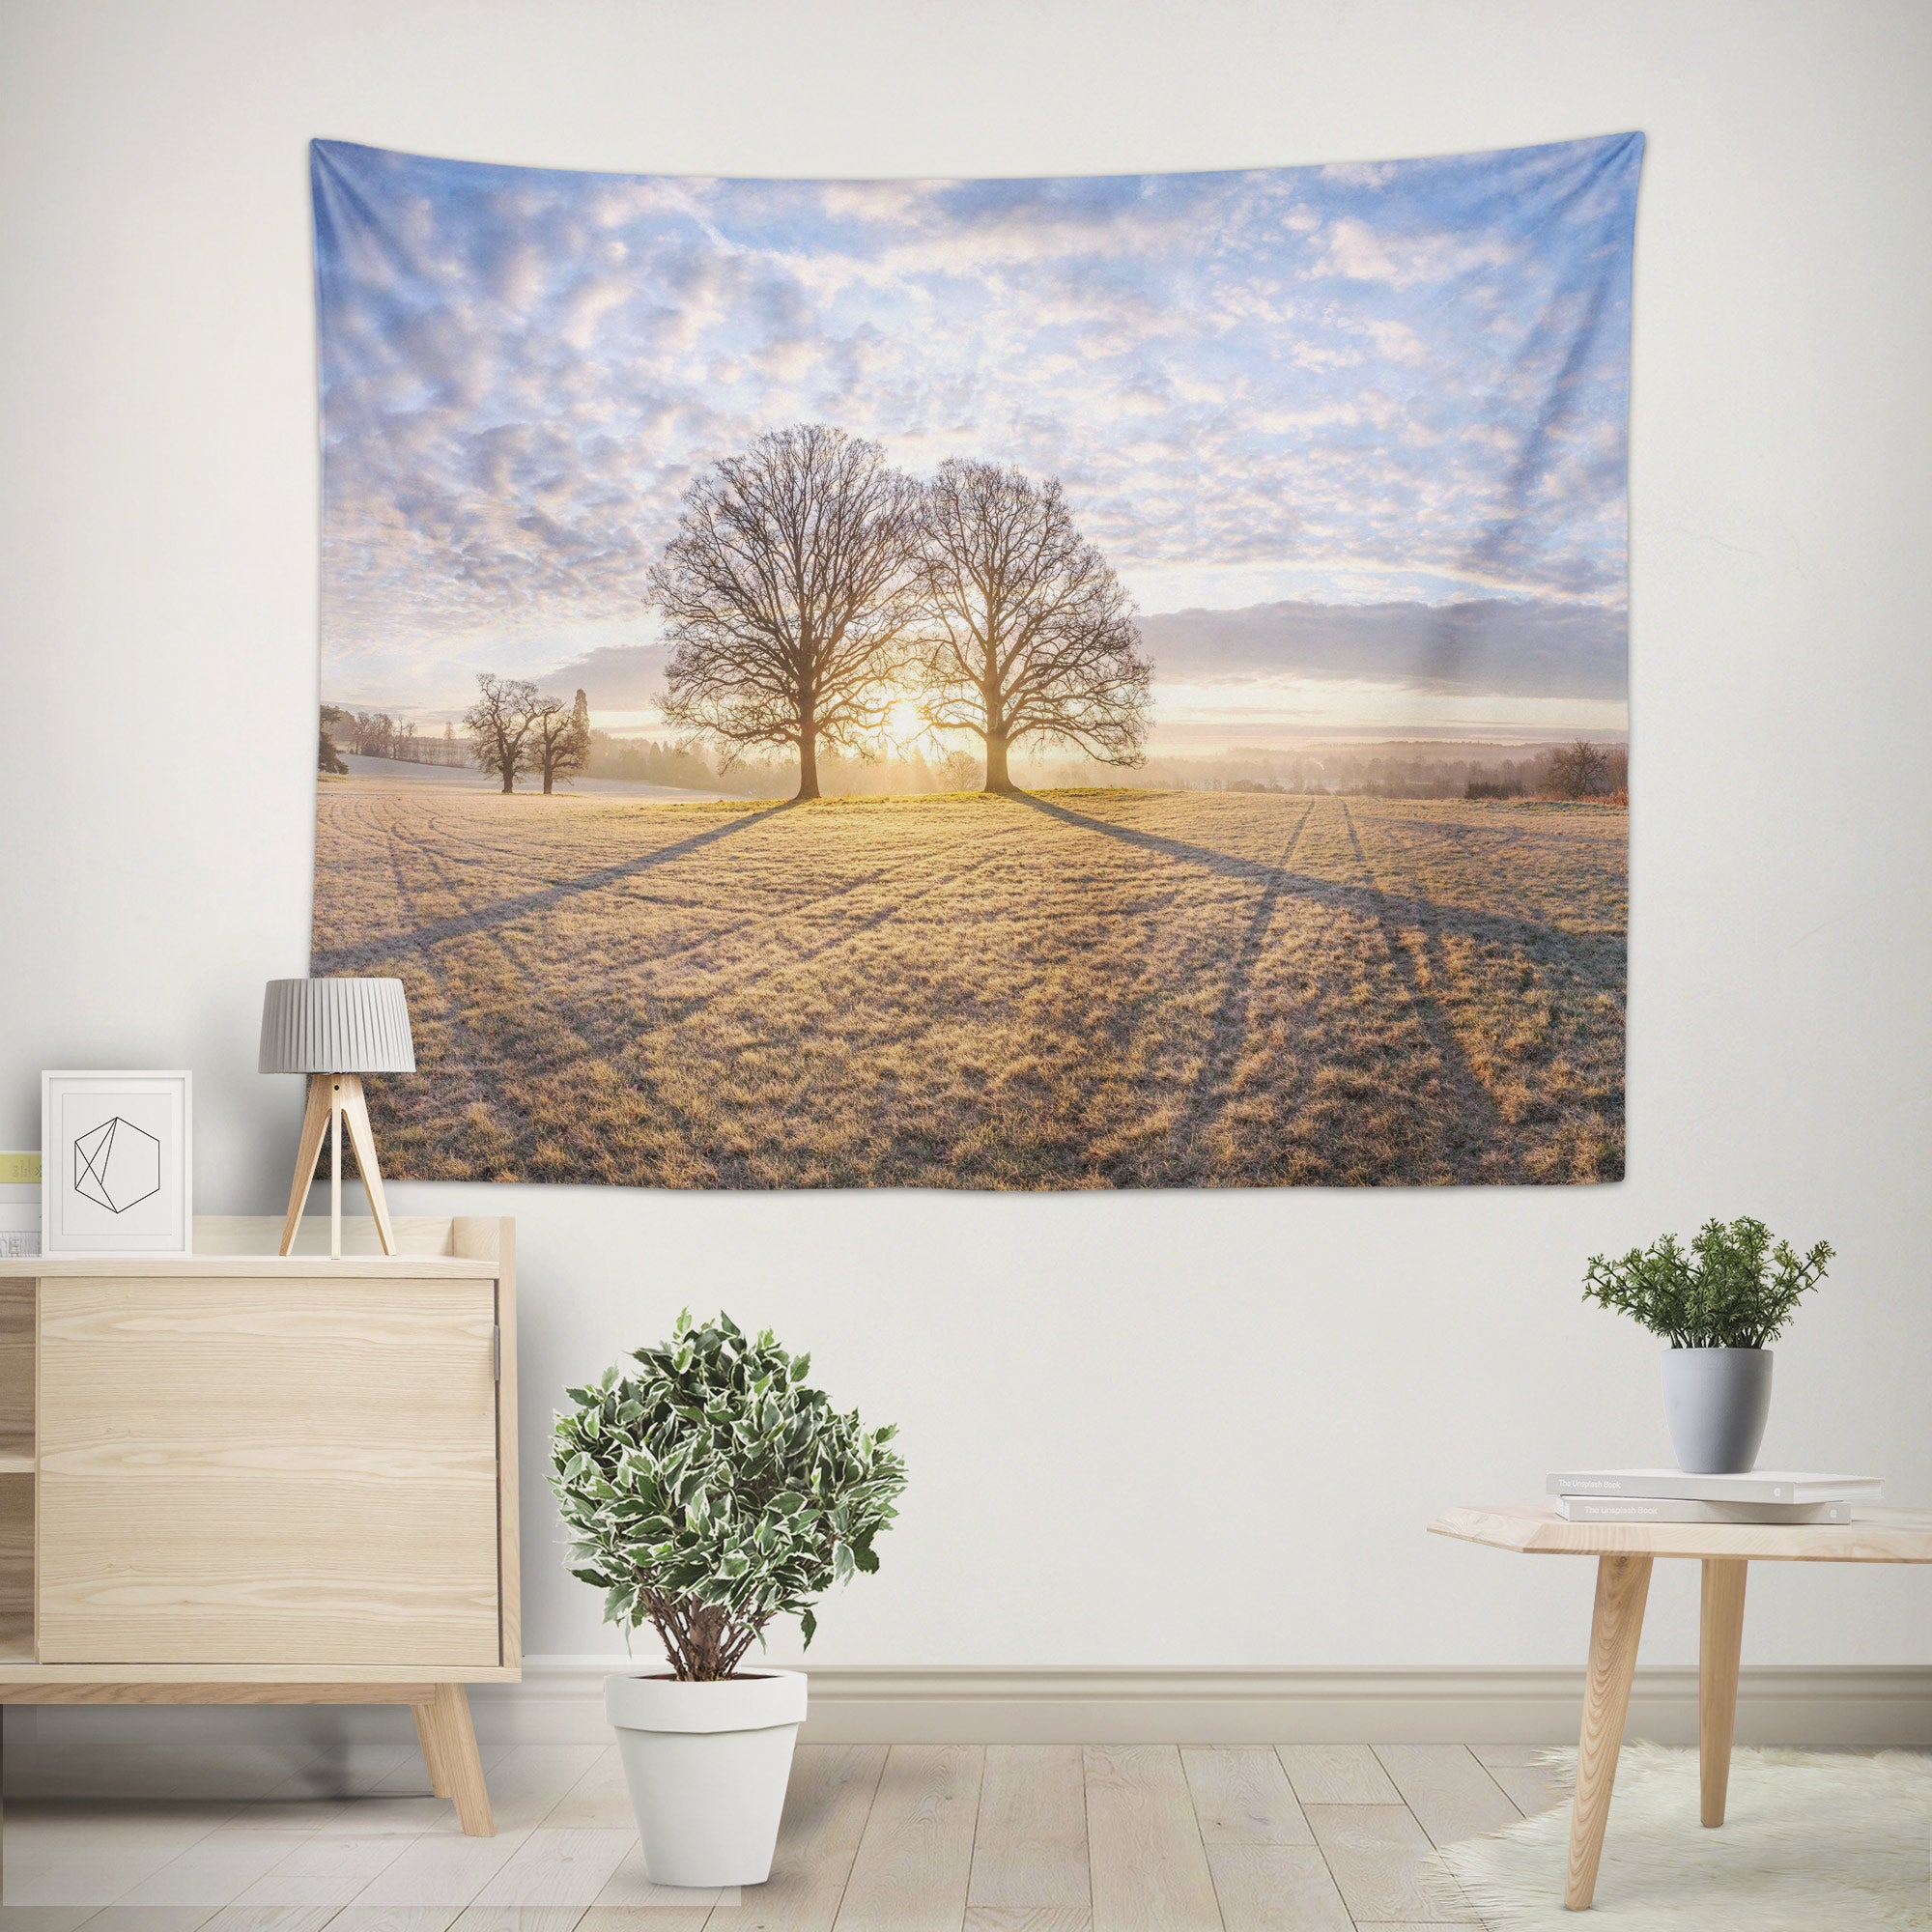 3D Tree Shadow 116155 Assaf Frank Tapestry Hanging Cloth Hang